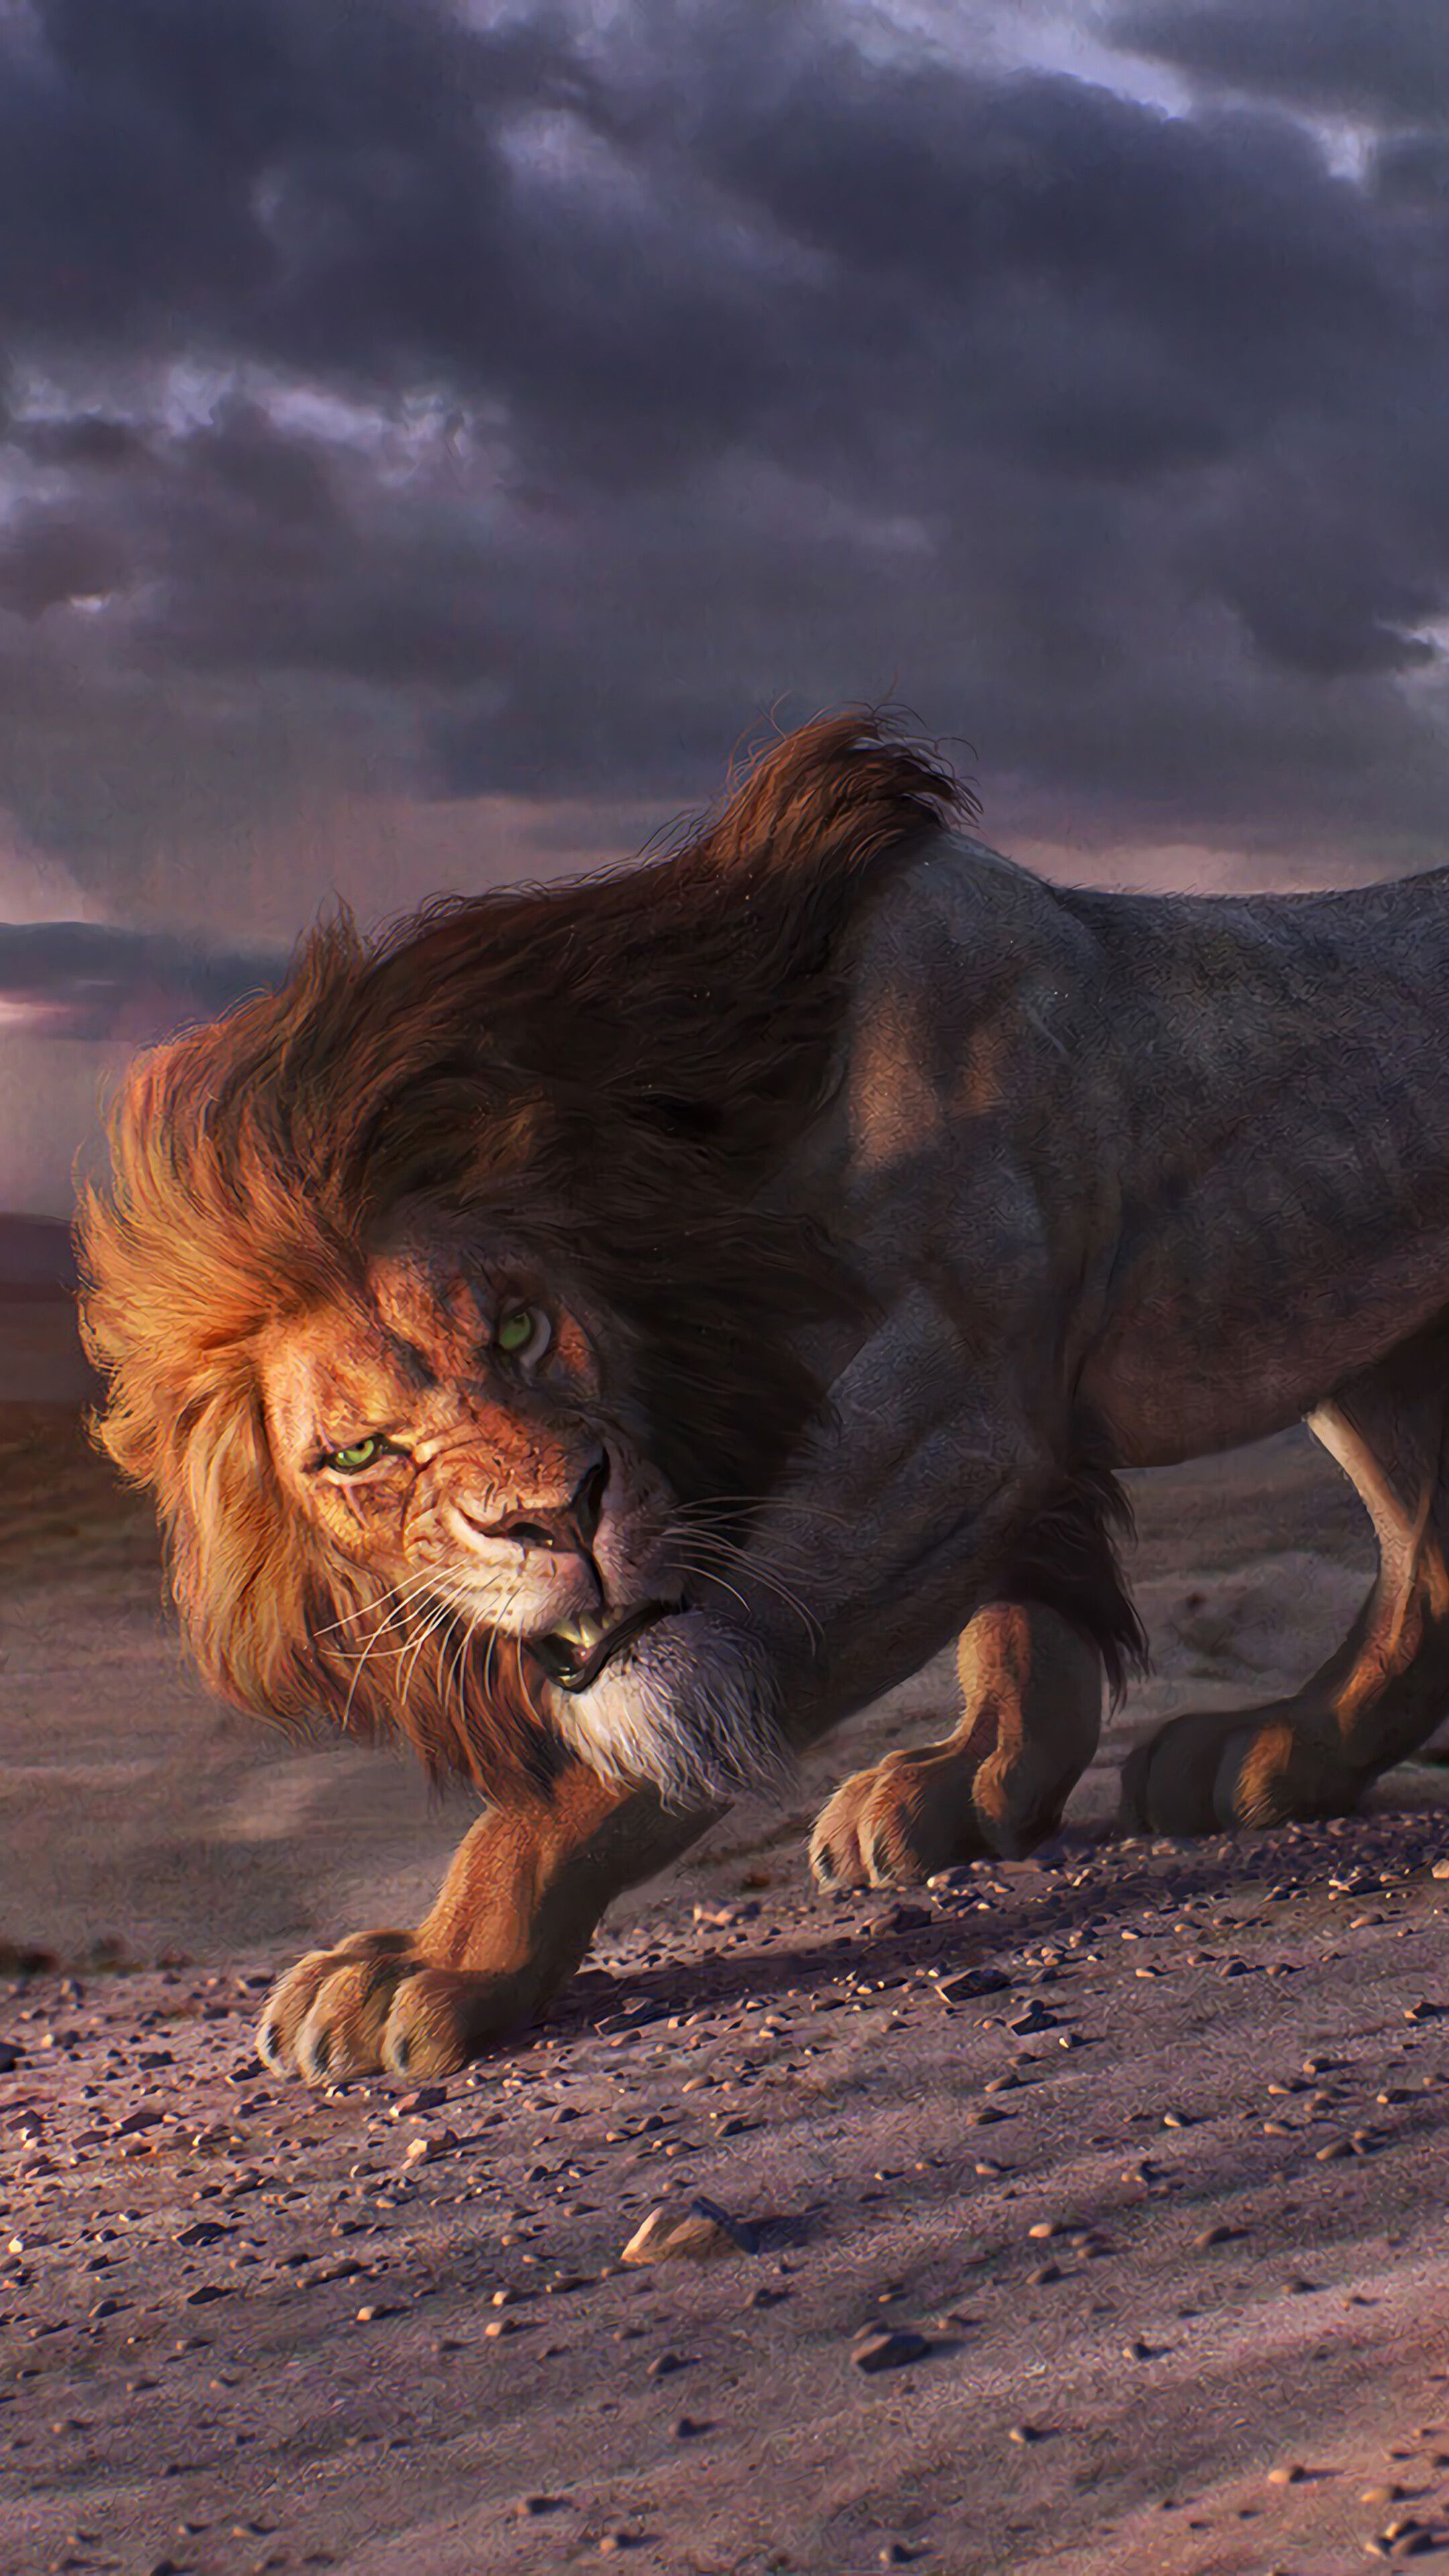 329804 Scar, The Lion King, Movie, 2019, 4K phone HD Wallpapers, Image, Backgrounds, Photos and Pictures